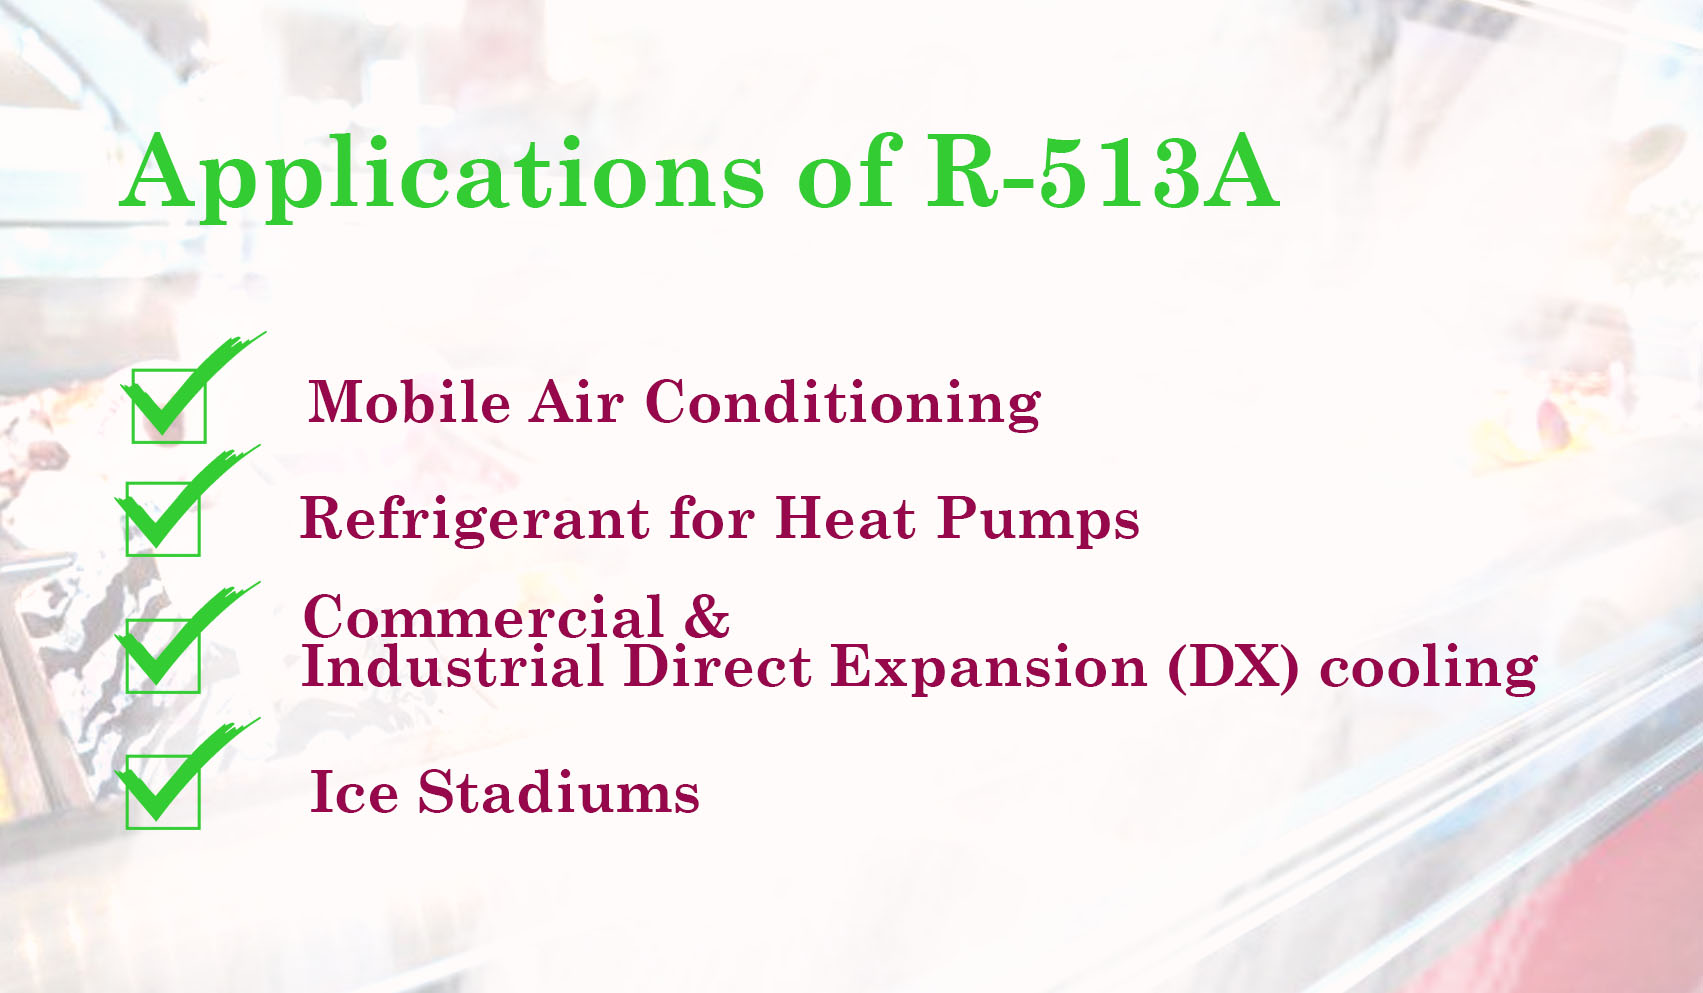 Common Applications of R-513A Refrigerant